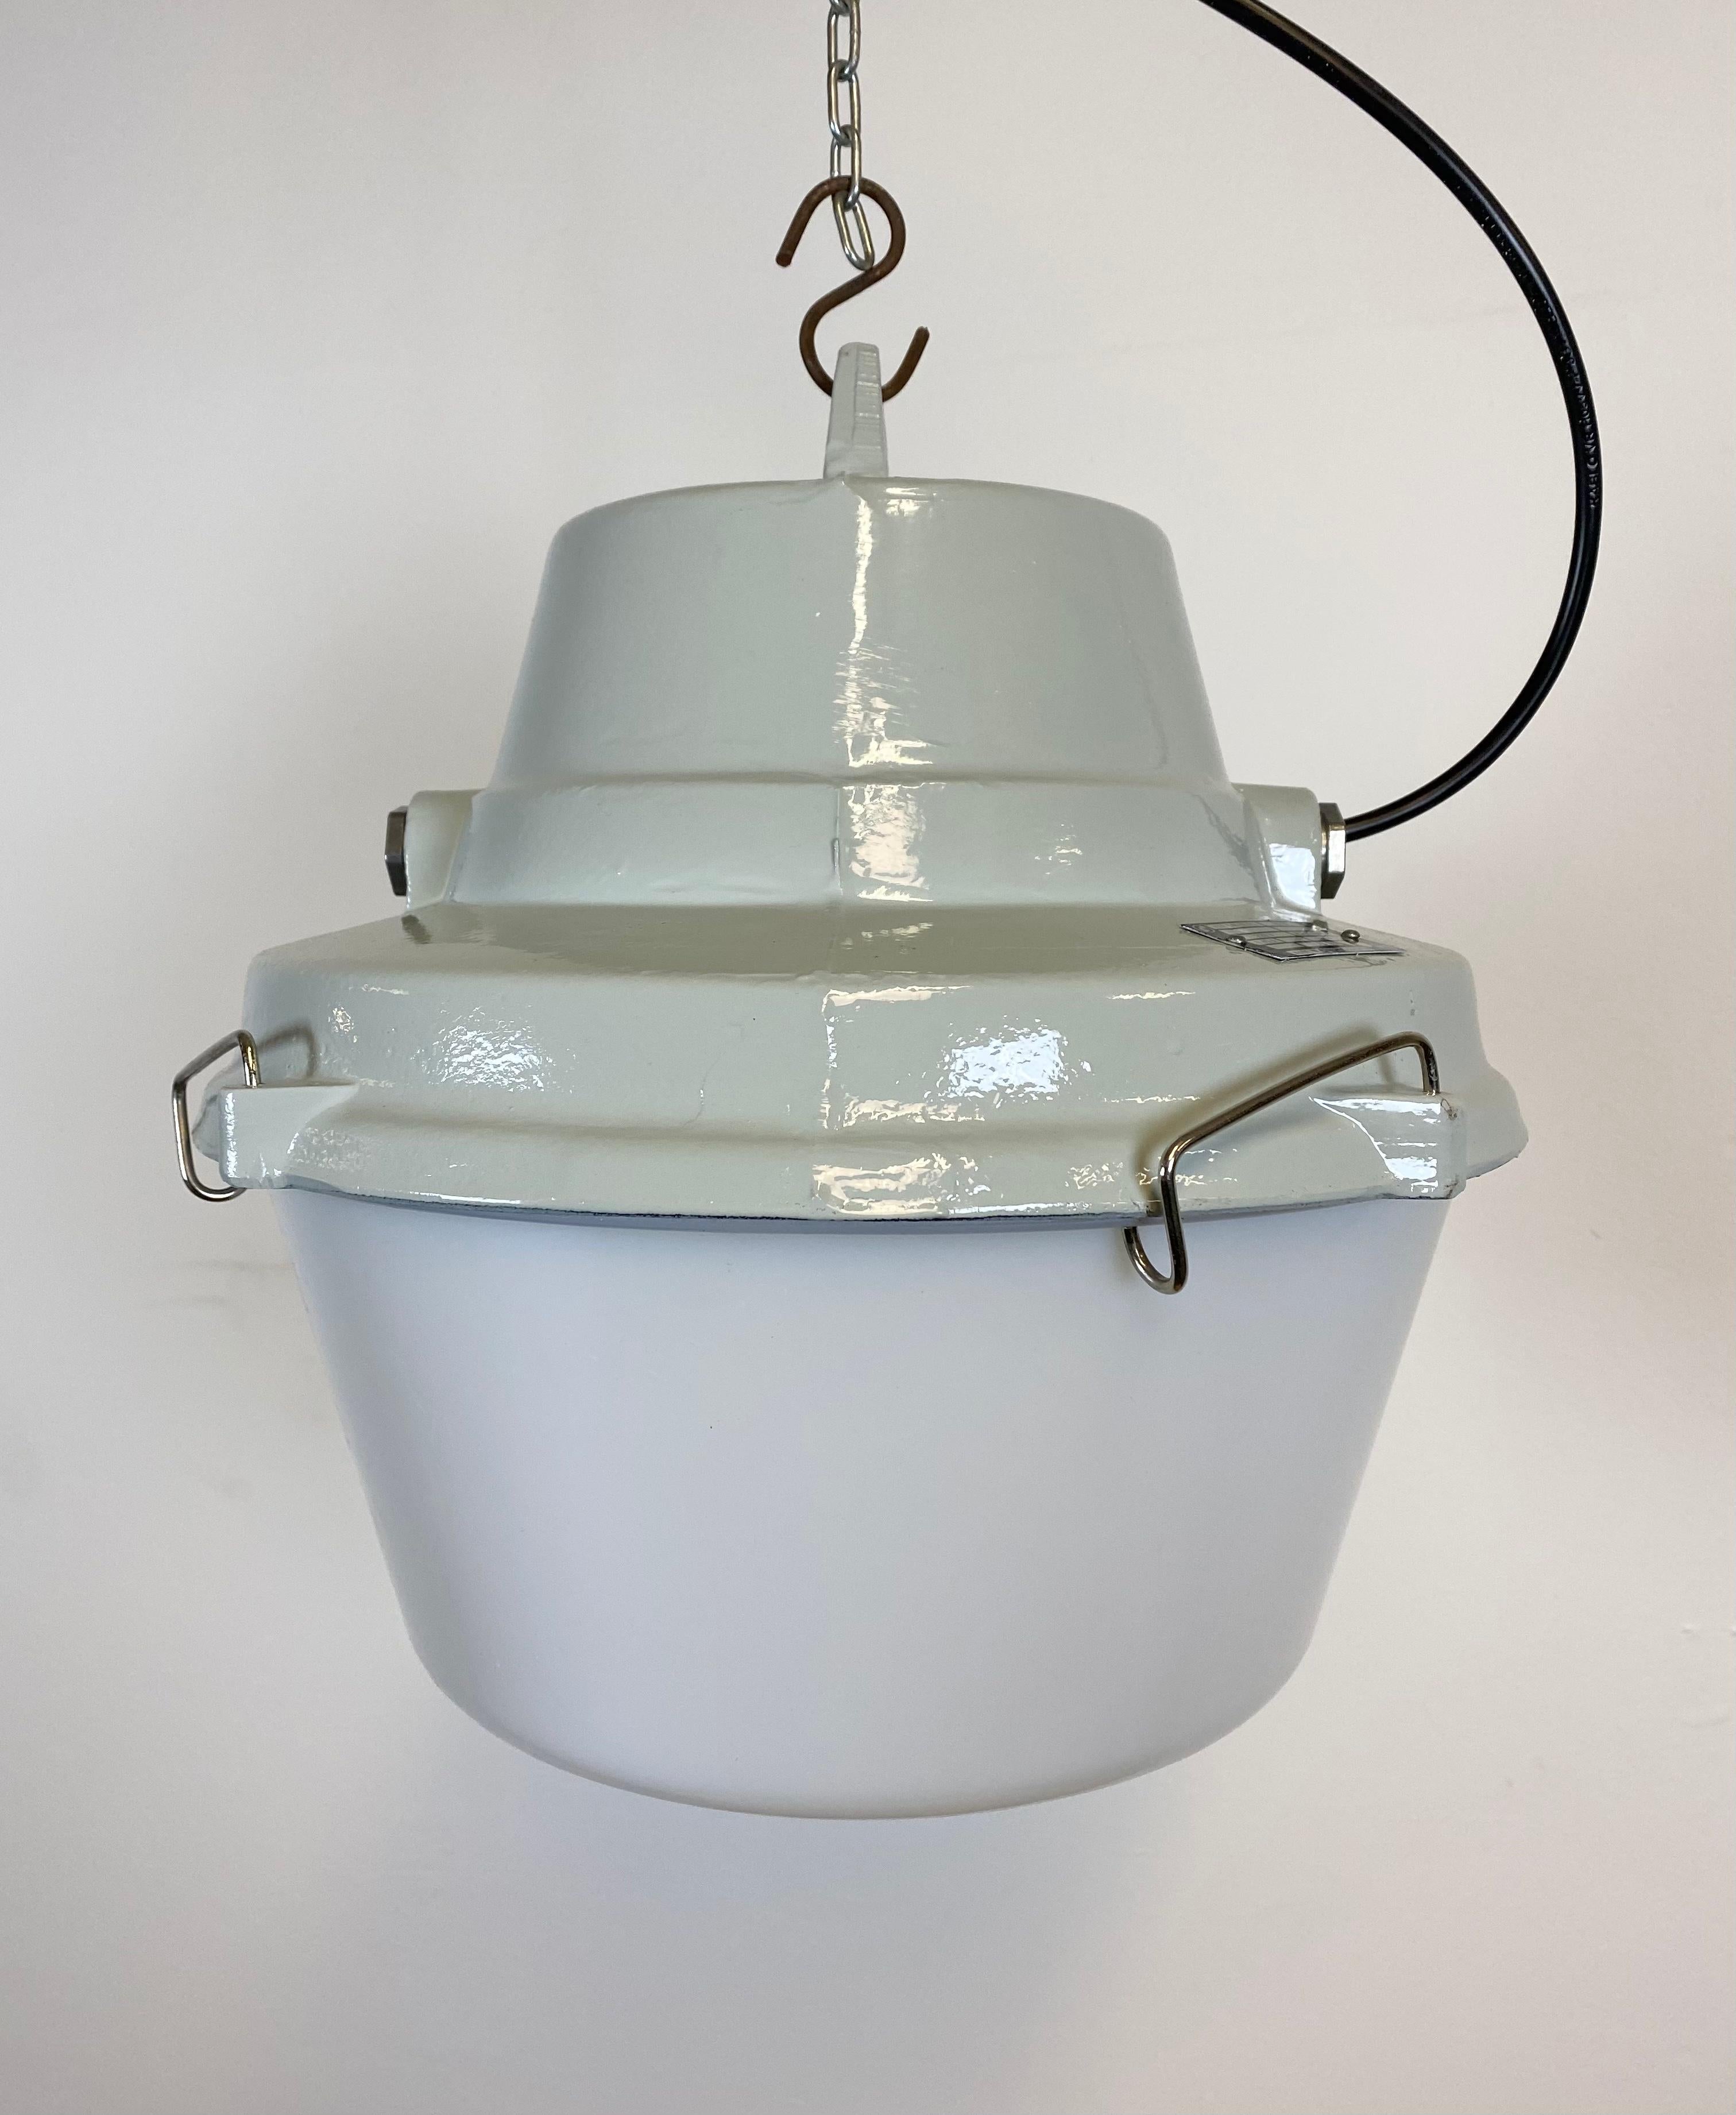 - Pendant lamp originally used in factories in former Czechoslovakia. 
- Made by Elektrosvit during the 1990s.
- Cast aluminium top.
- Milk plastic cover.
- New porcelain socket for E 27 lightbulbs and wire. 
- Weight: 3,5 kg.